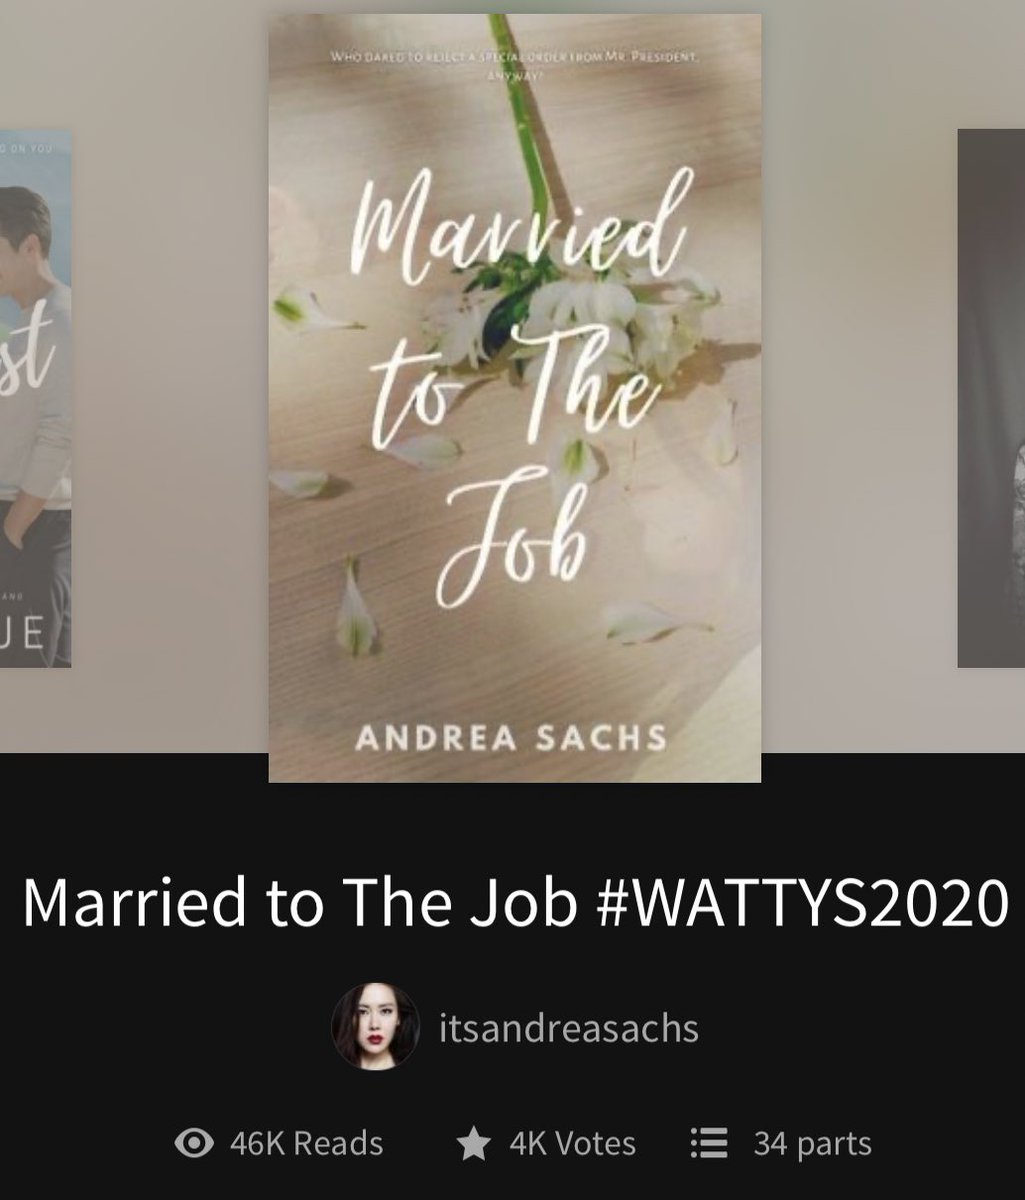 2. Married to The Job by  @itsandreasachs — One of my favorite  #BINJIN AU. In this story, I really felt the mixed feelings and an unpredictable plot twist. There are always unexpected events in the game in this story. I’m still curious and I hope there will be a sequel. 